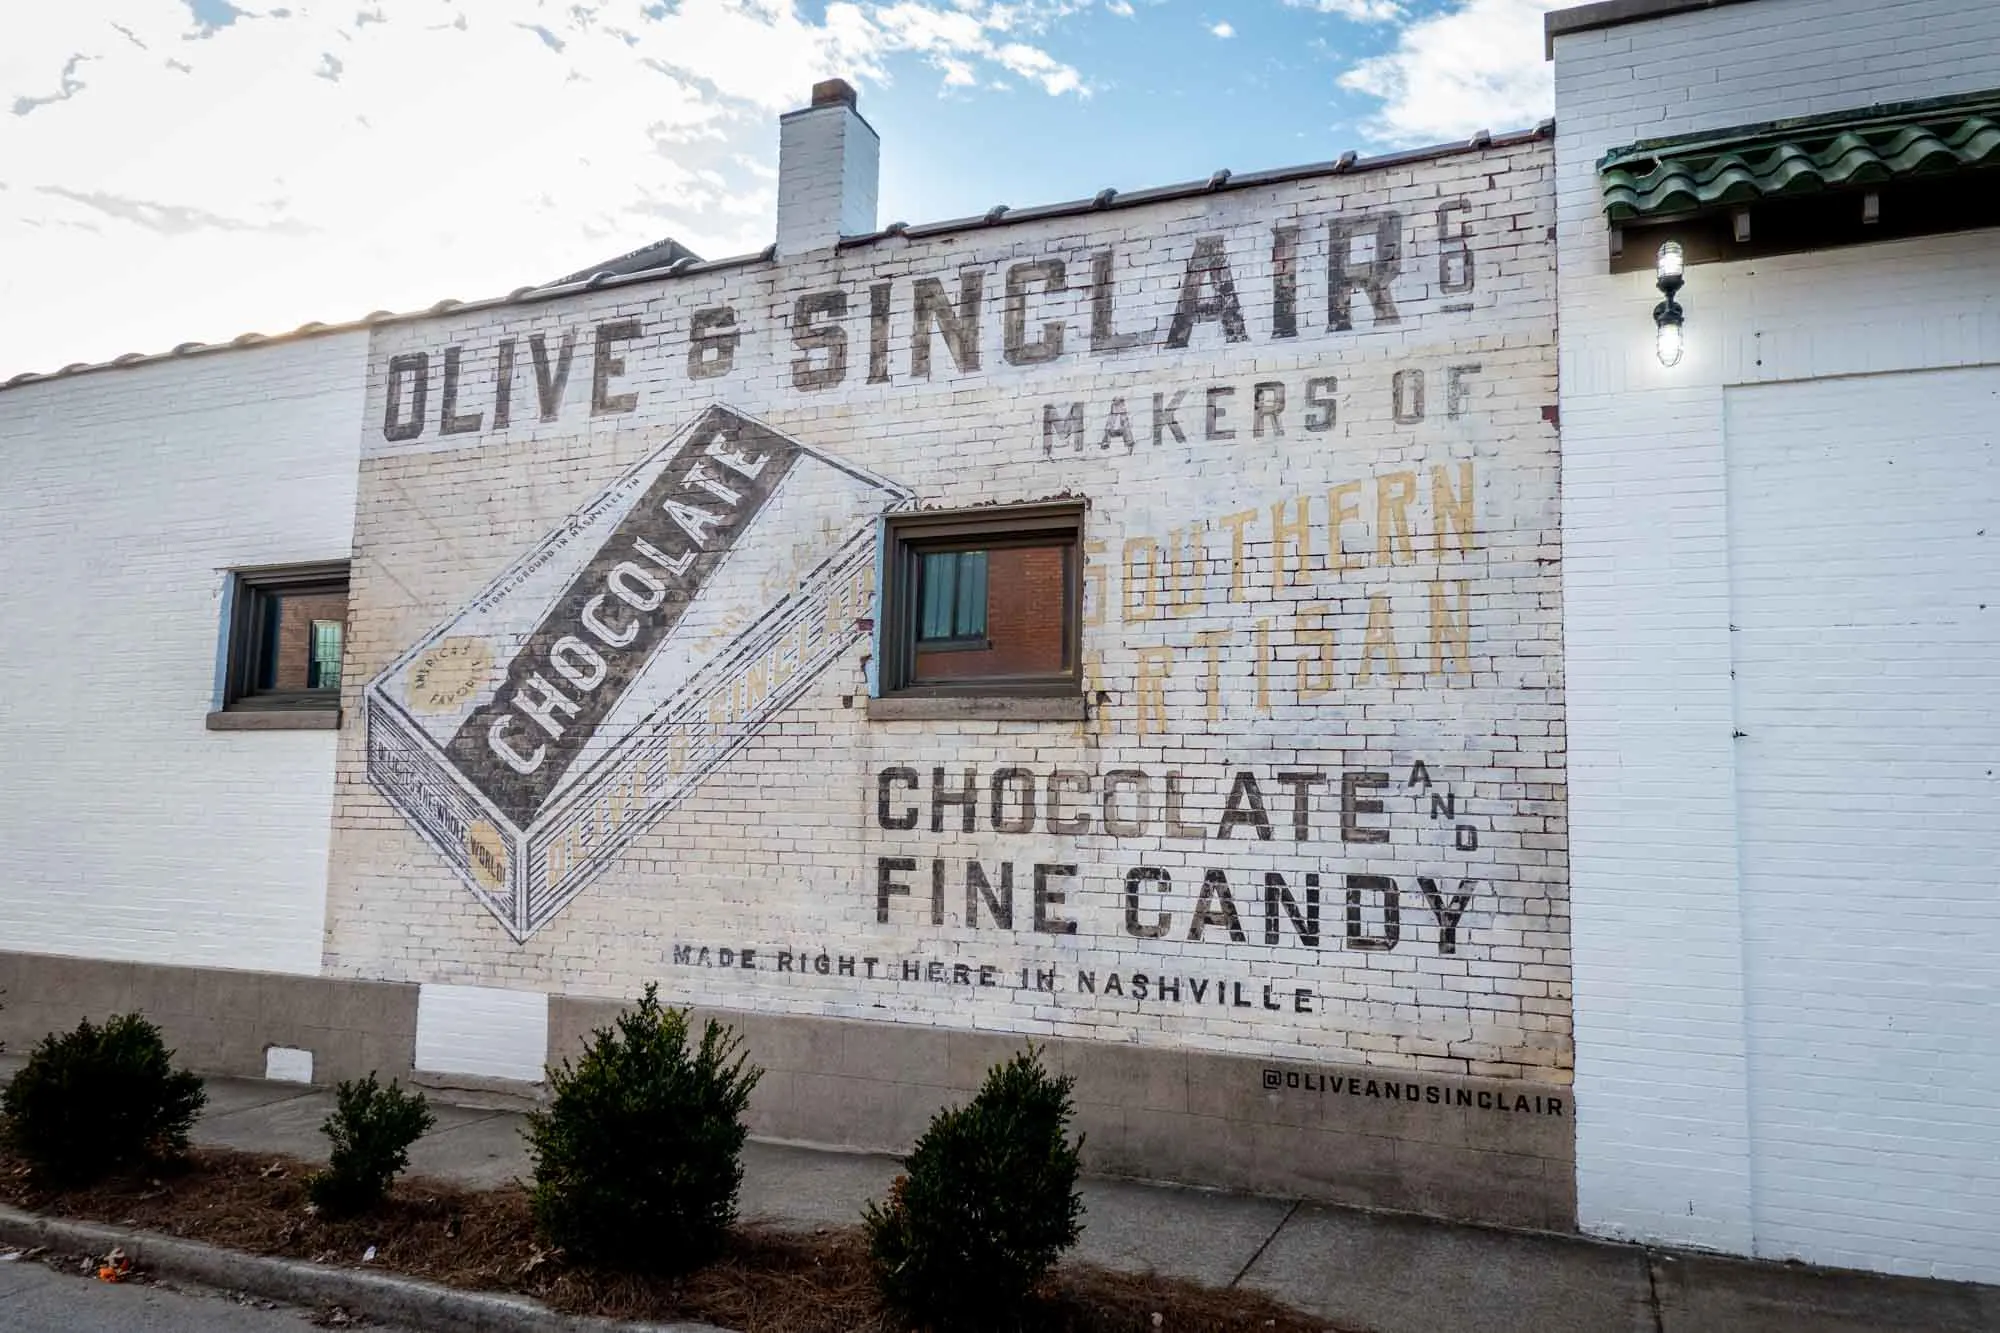 White brick wall painted with an old fashioned advertisement for "Olive & Sinclair Co., Makers of Southern Artisam Chocolate and Fine Candy Made Right Here in Nashville"